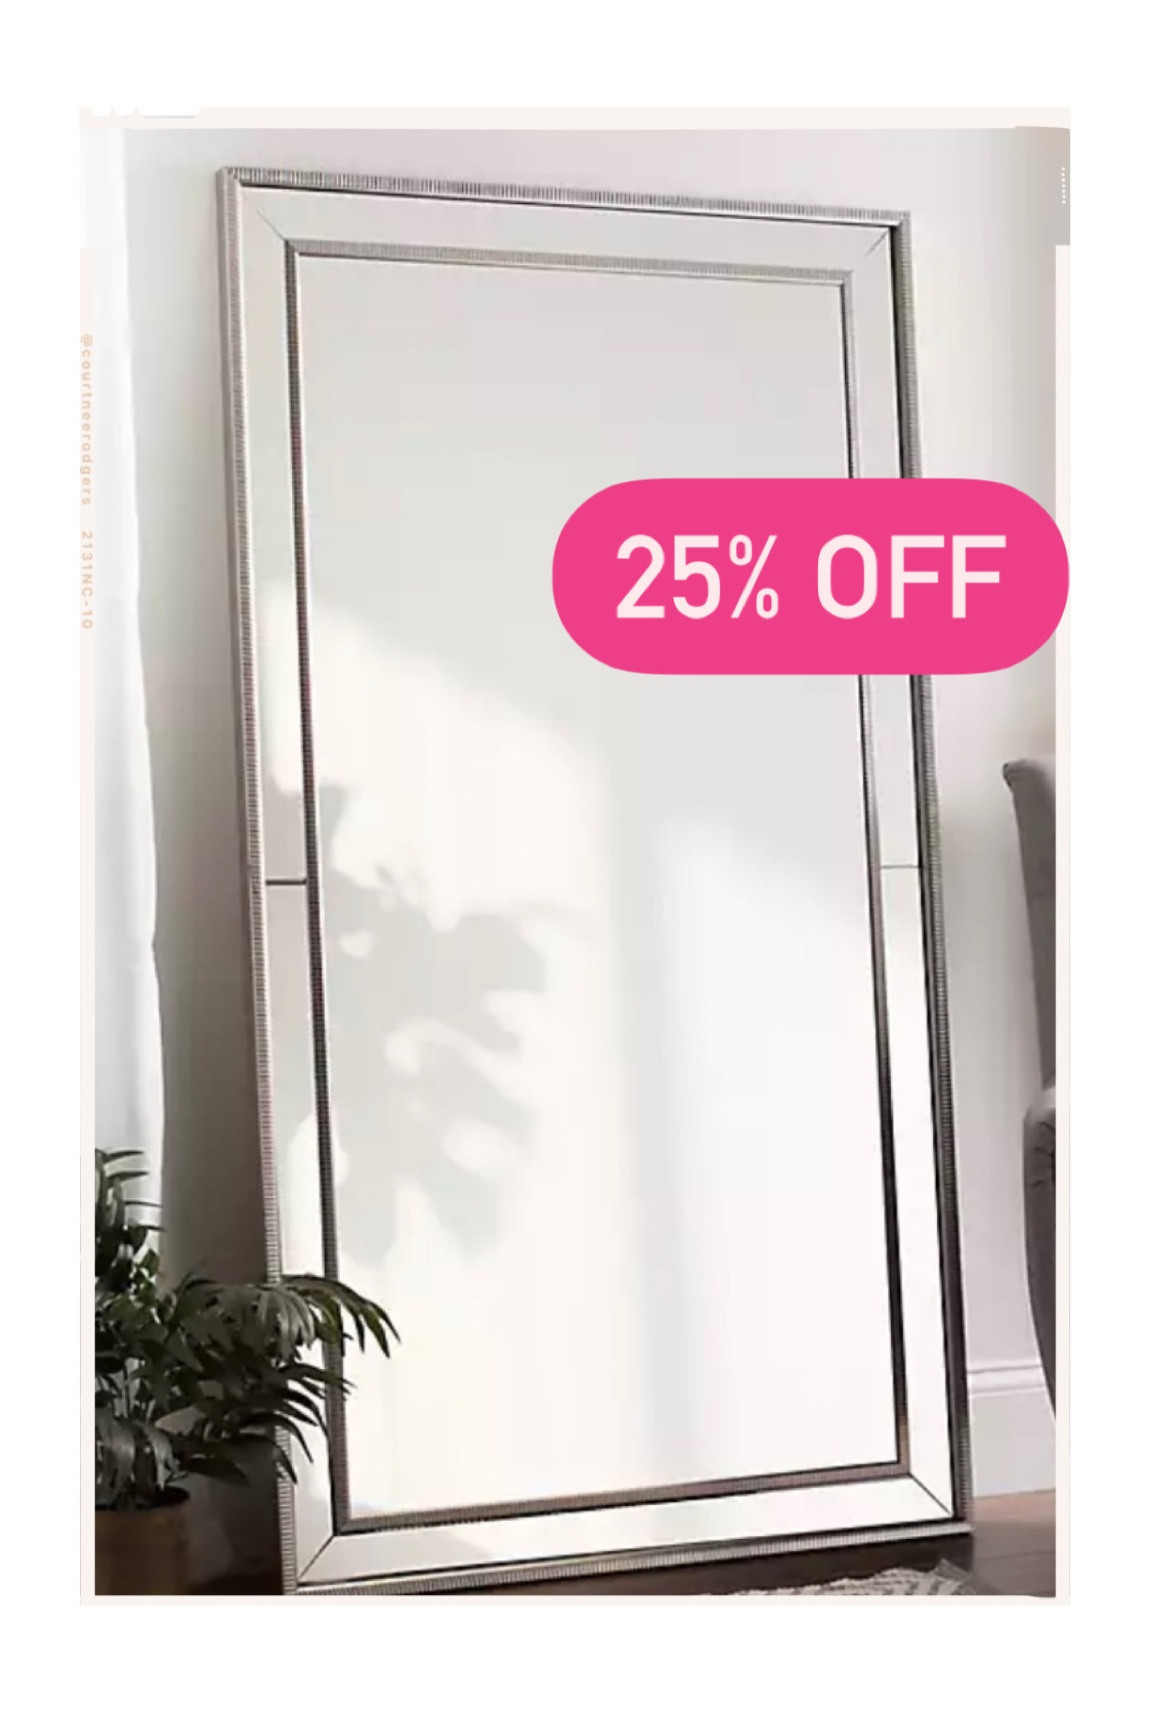 Large Silver Luxe Mirror, 37.2x67.2 in.